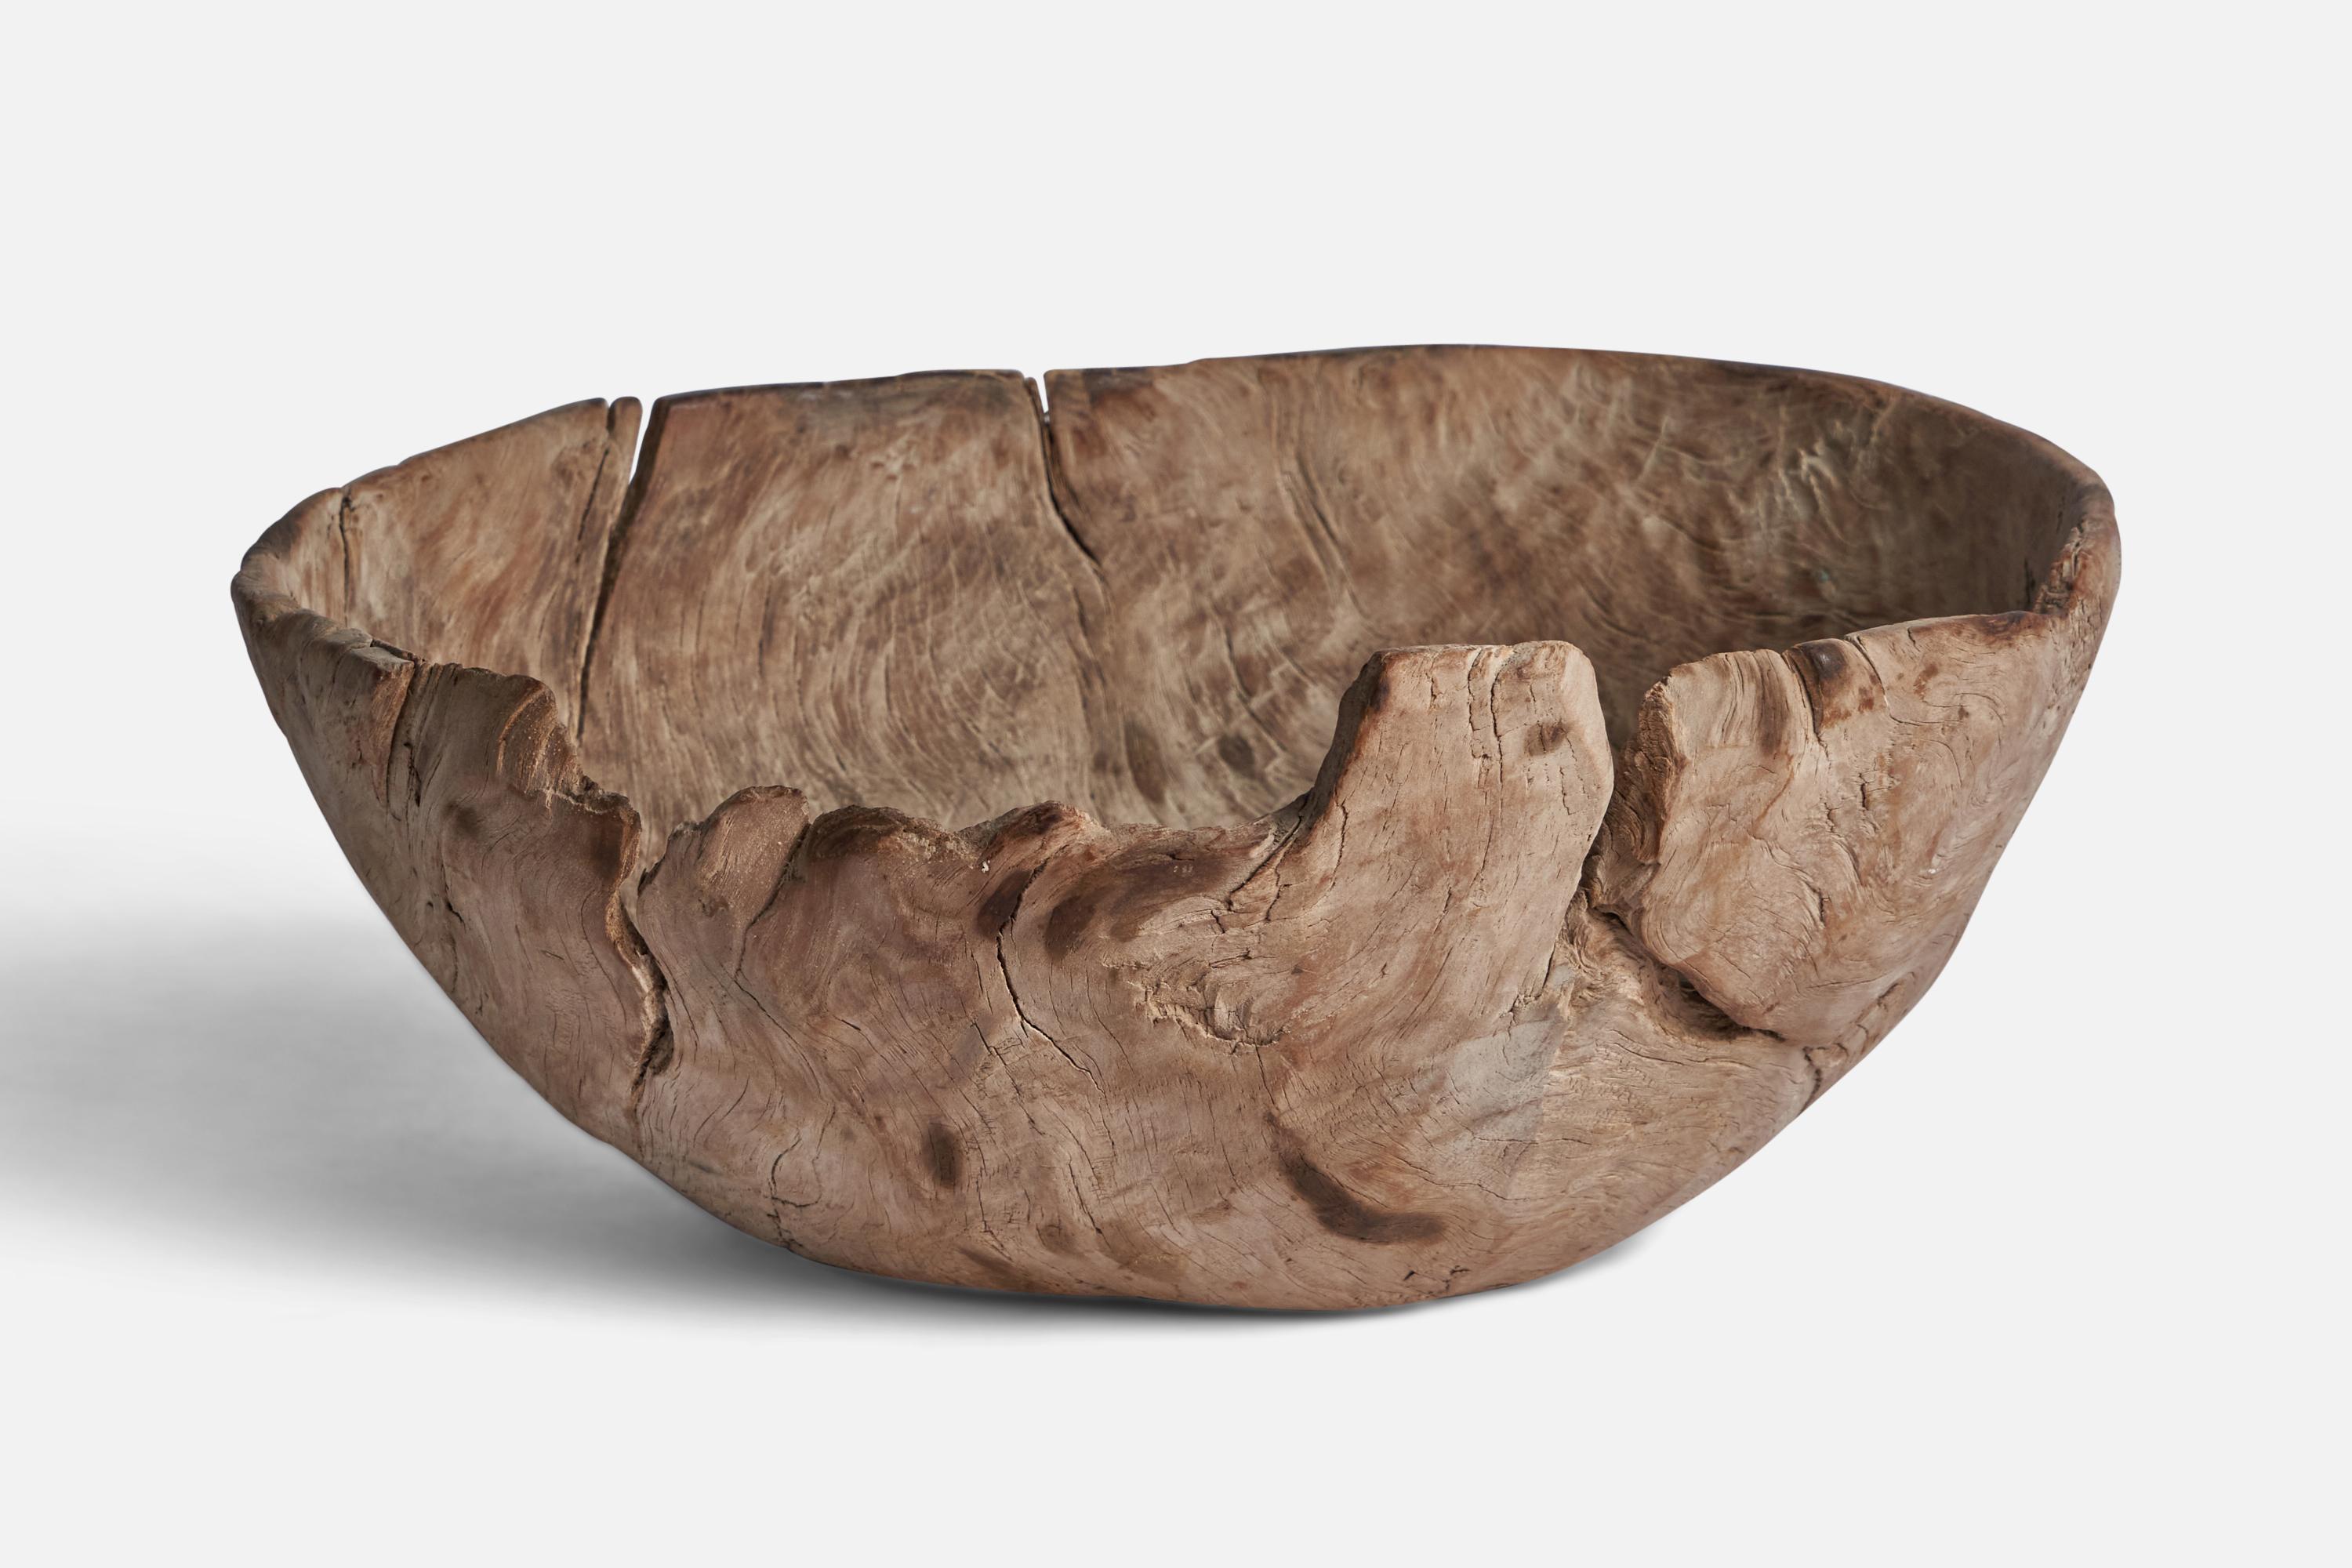 A wood bowl produced in Sweden, c. 17th century.